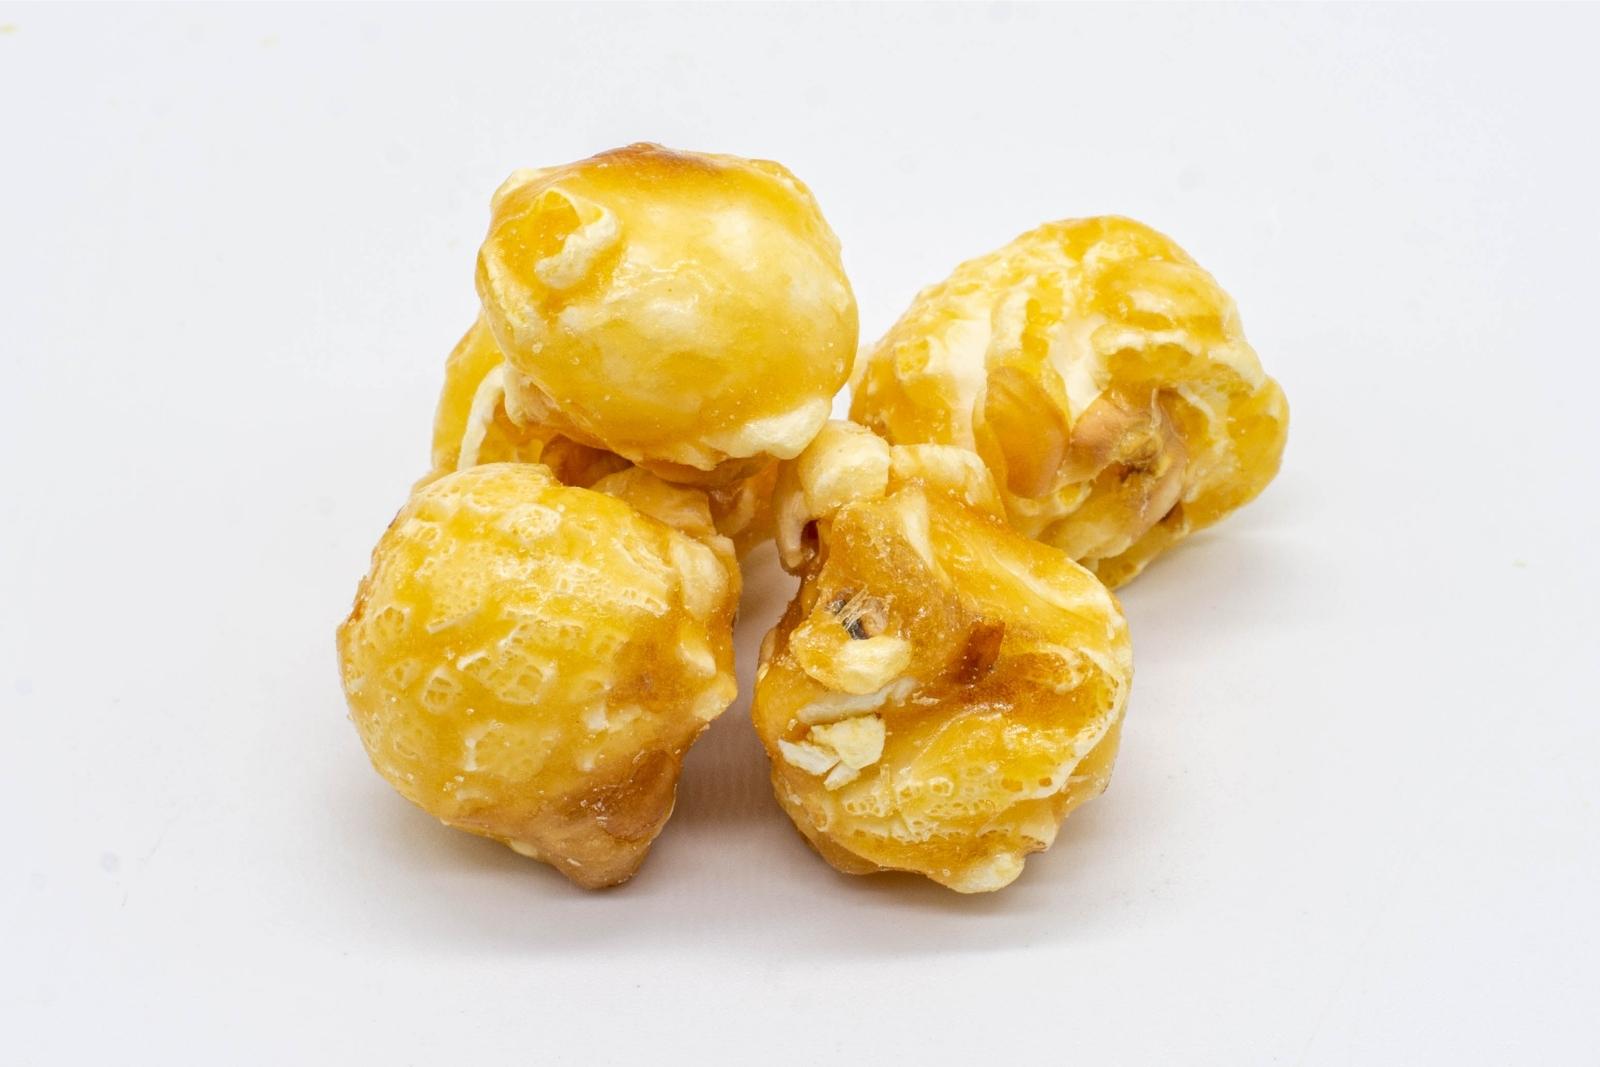 A small pile of loose 1:1 Caramel Popcorn, made by XITE, on a white background